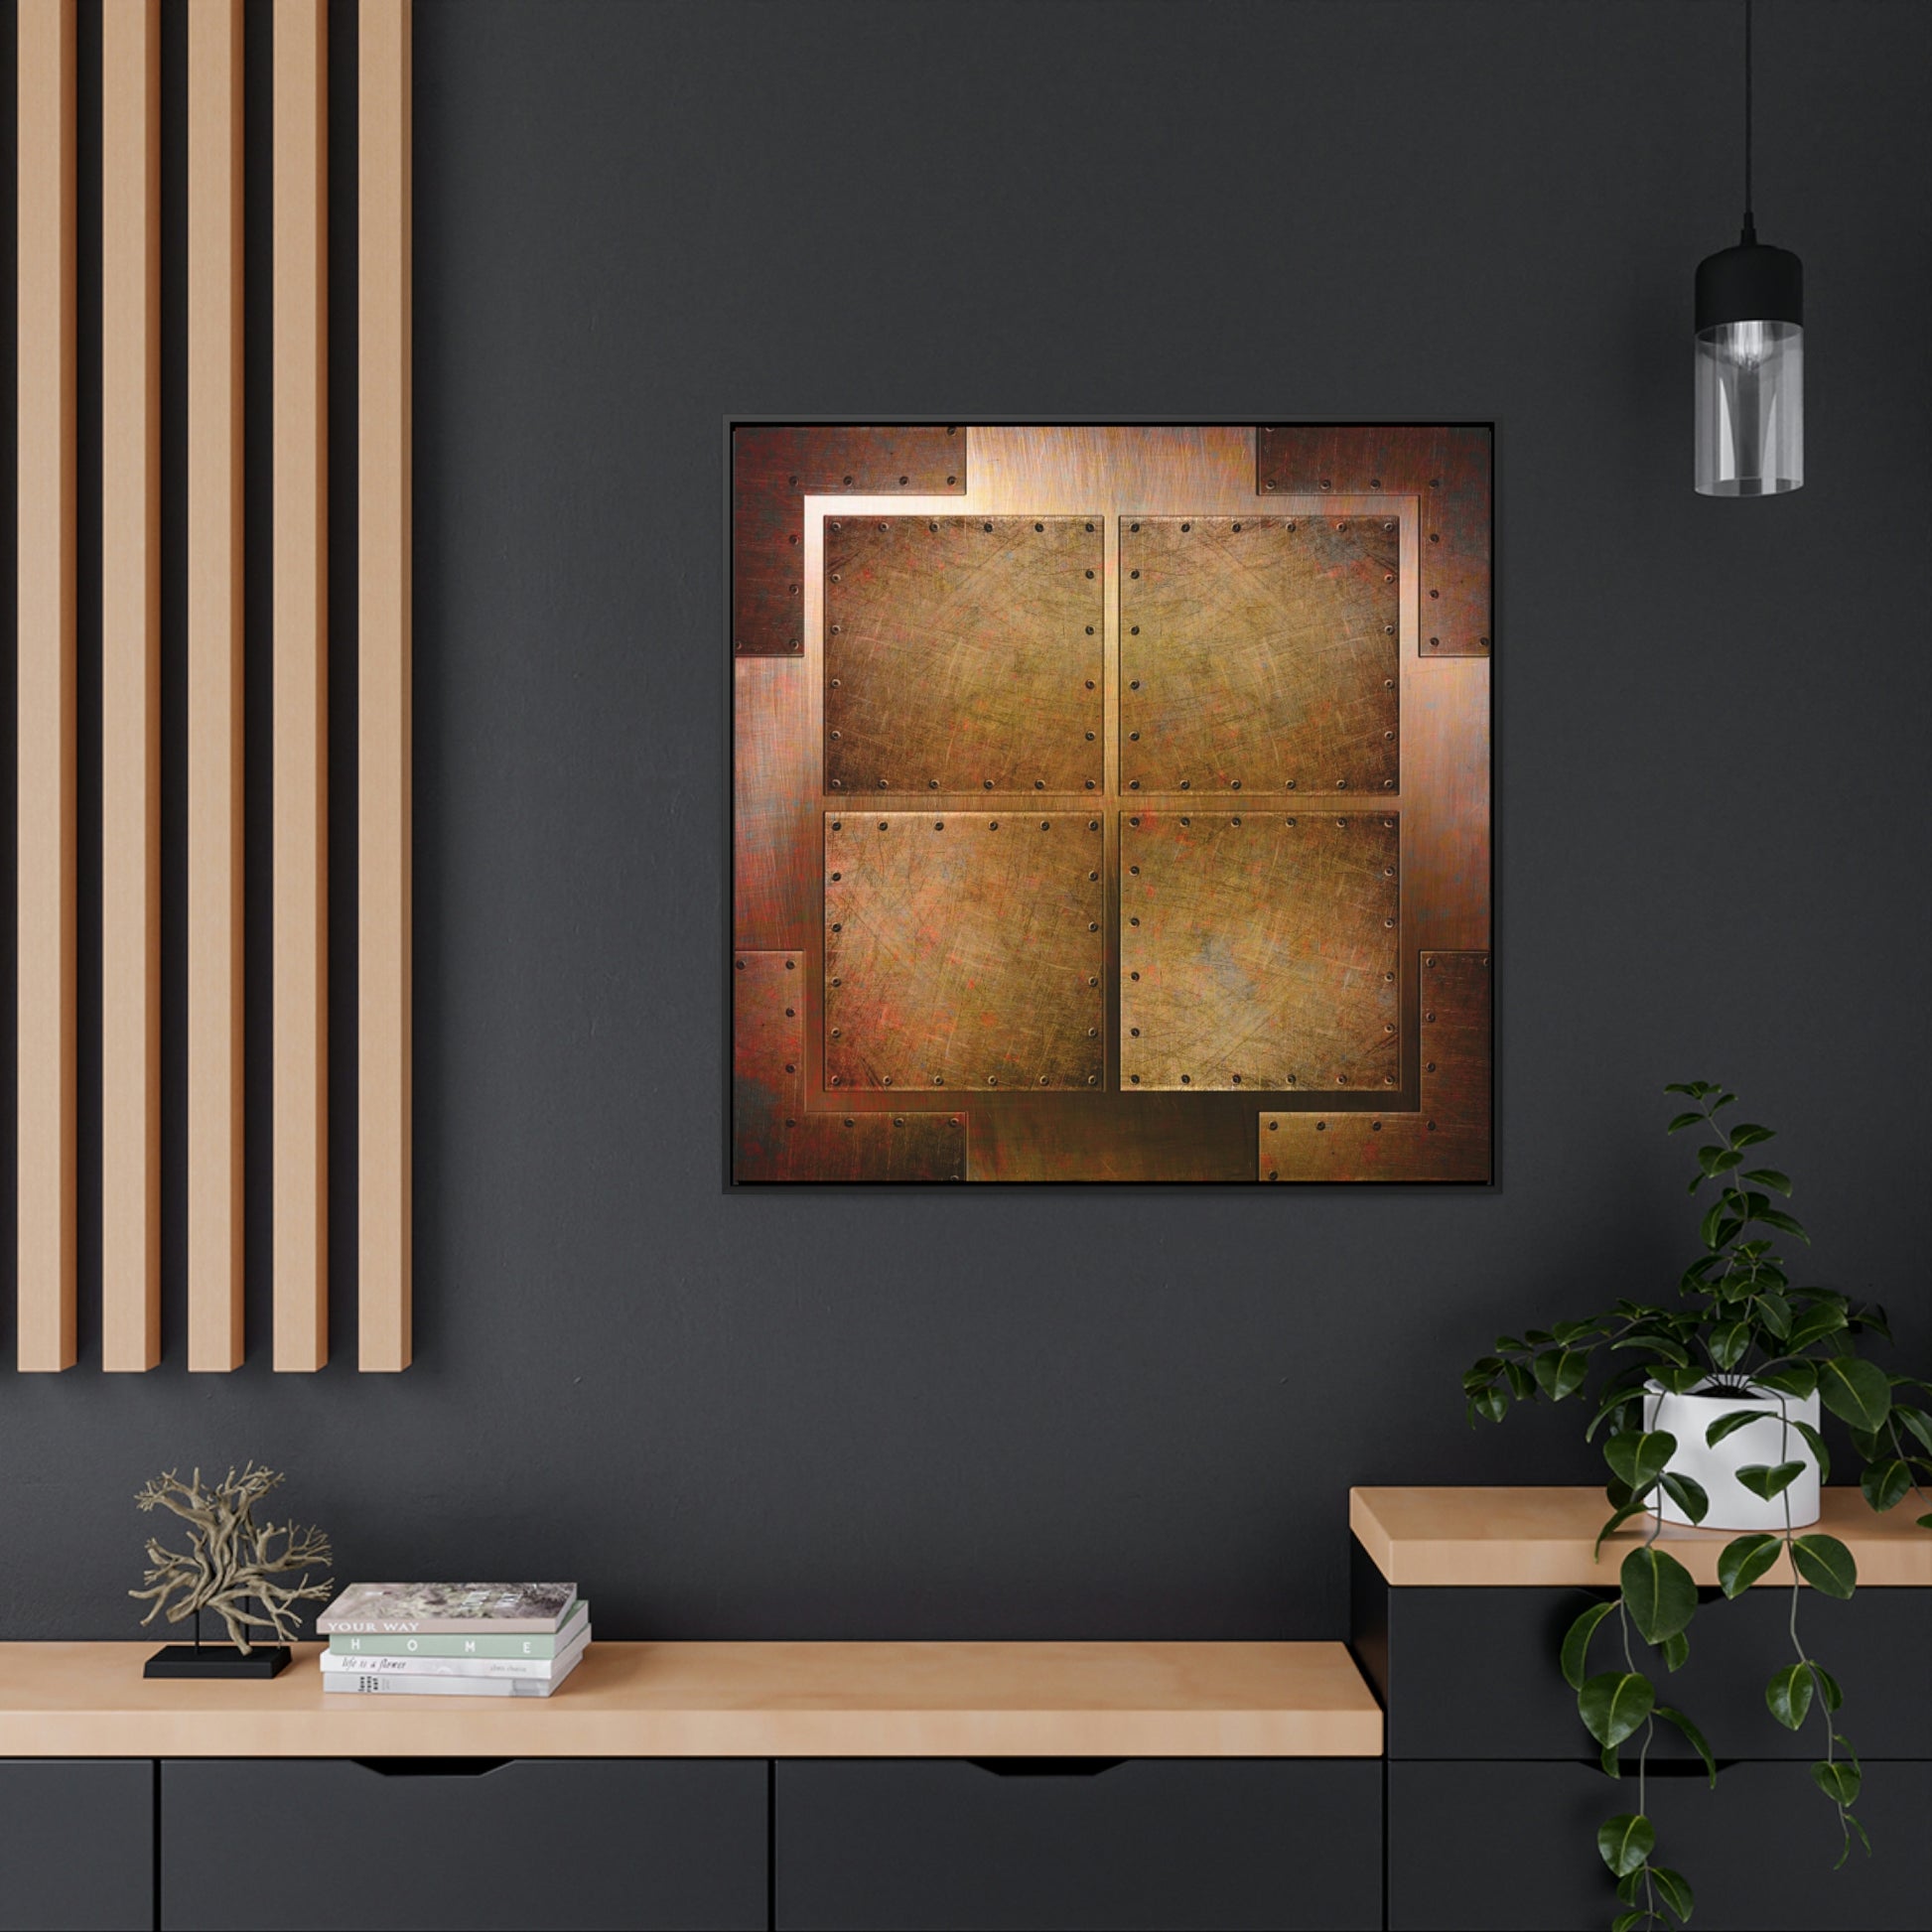 Steampunk Themed Framed Wall Art - Distressed, Riveted Copper Sheets Print on Canvas in a Floating Frame hung on black wall